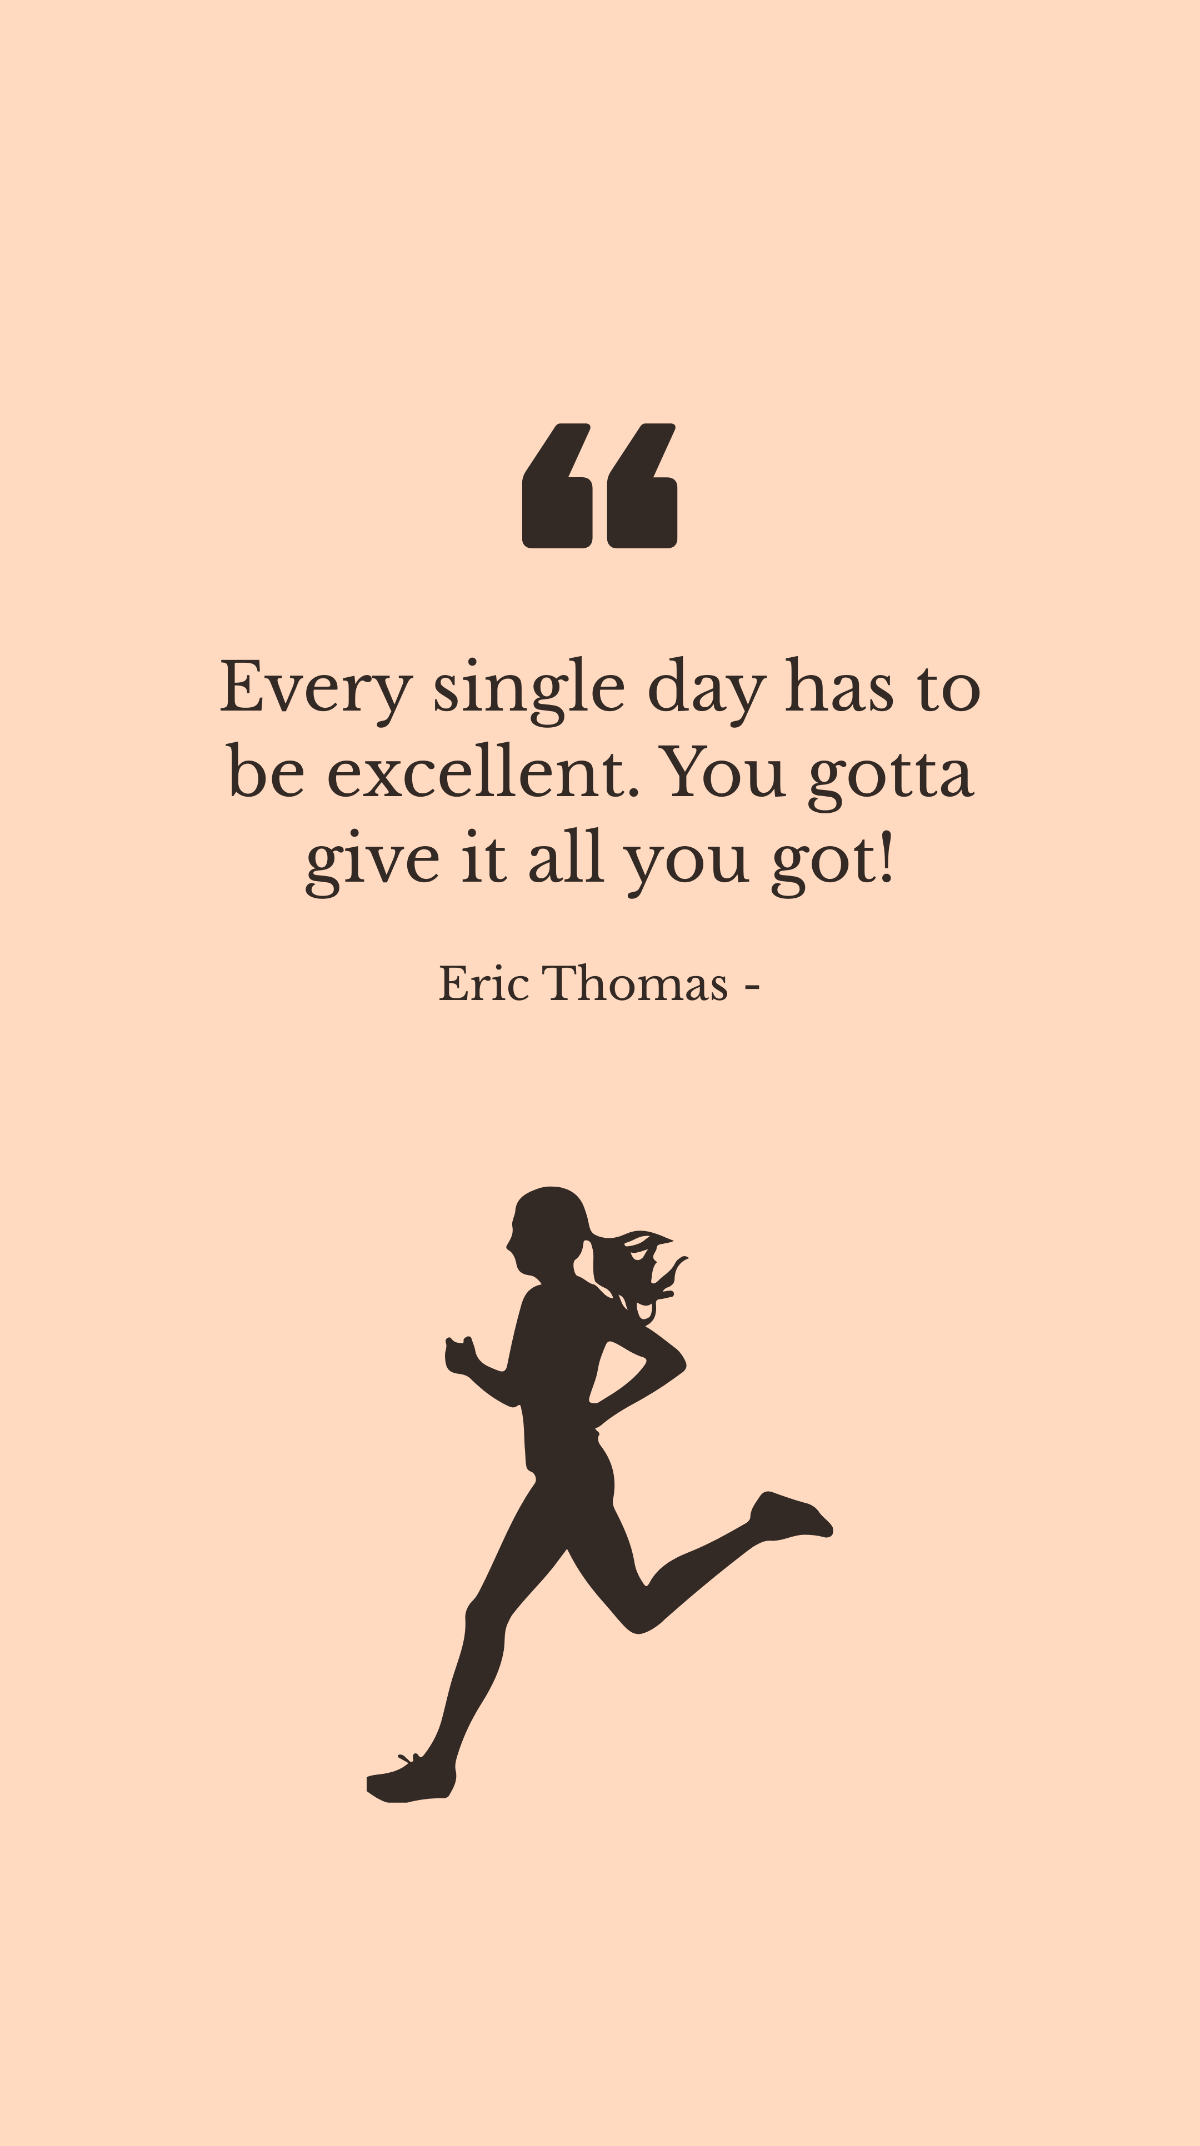 Eric Thomas - Every single day has to be excellent. You gotta give it all you got! Template